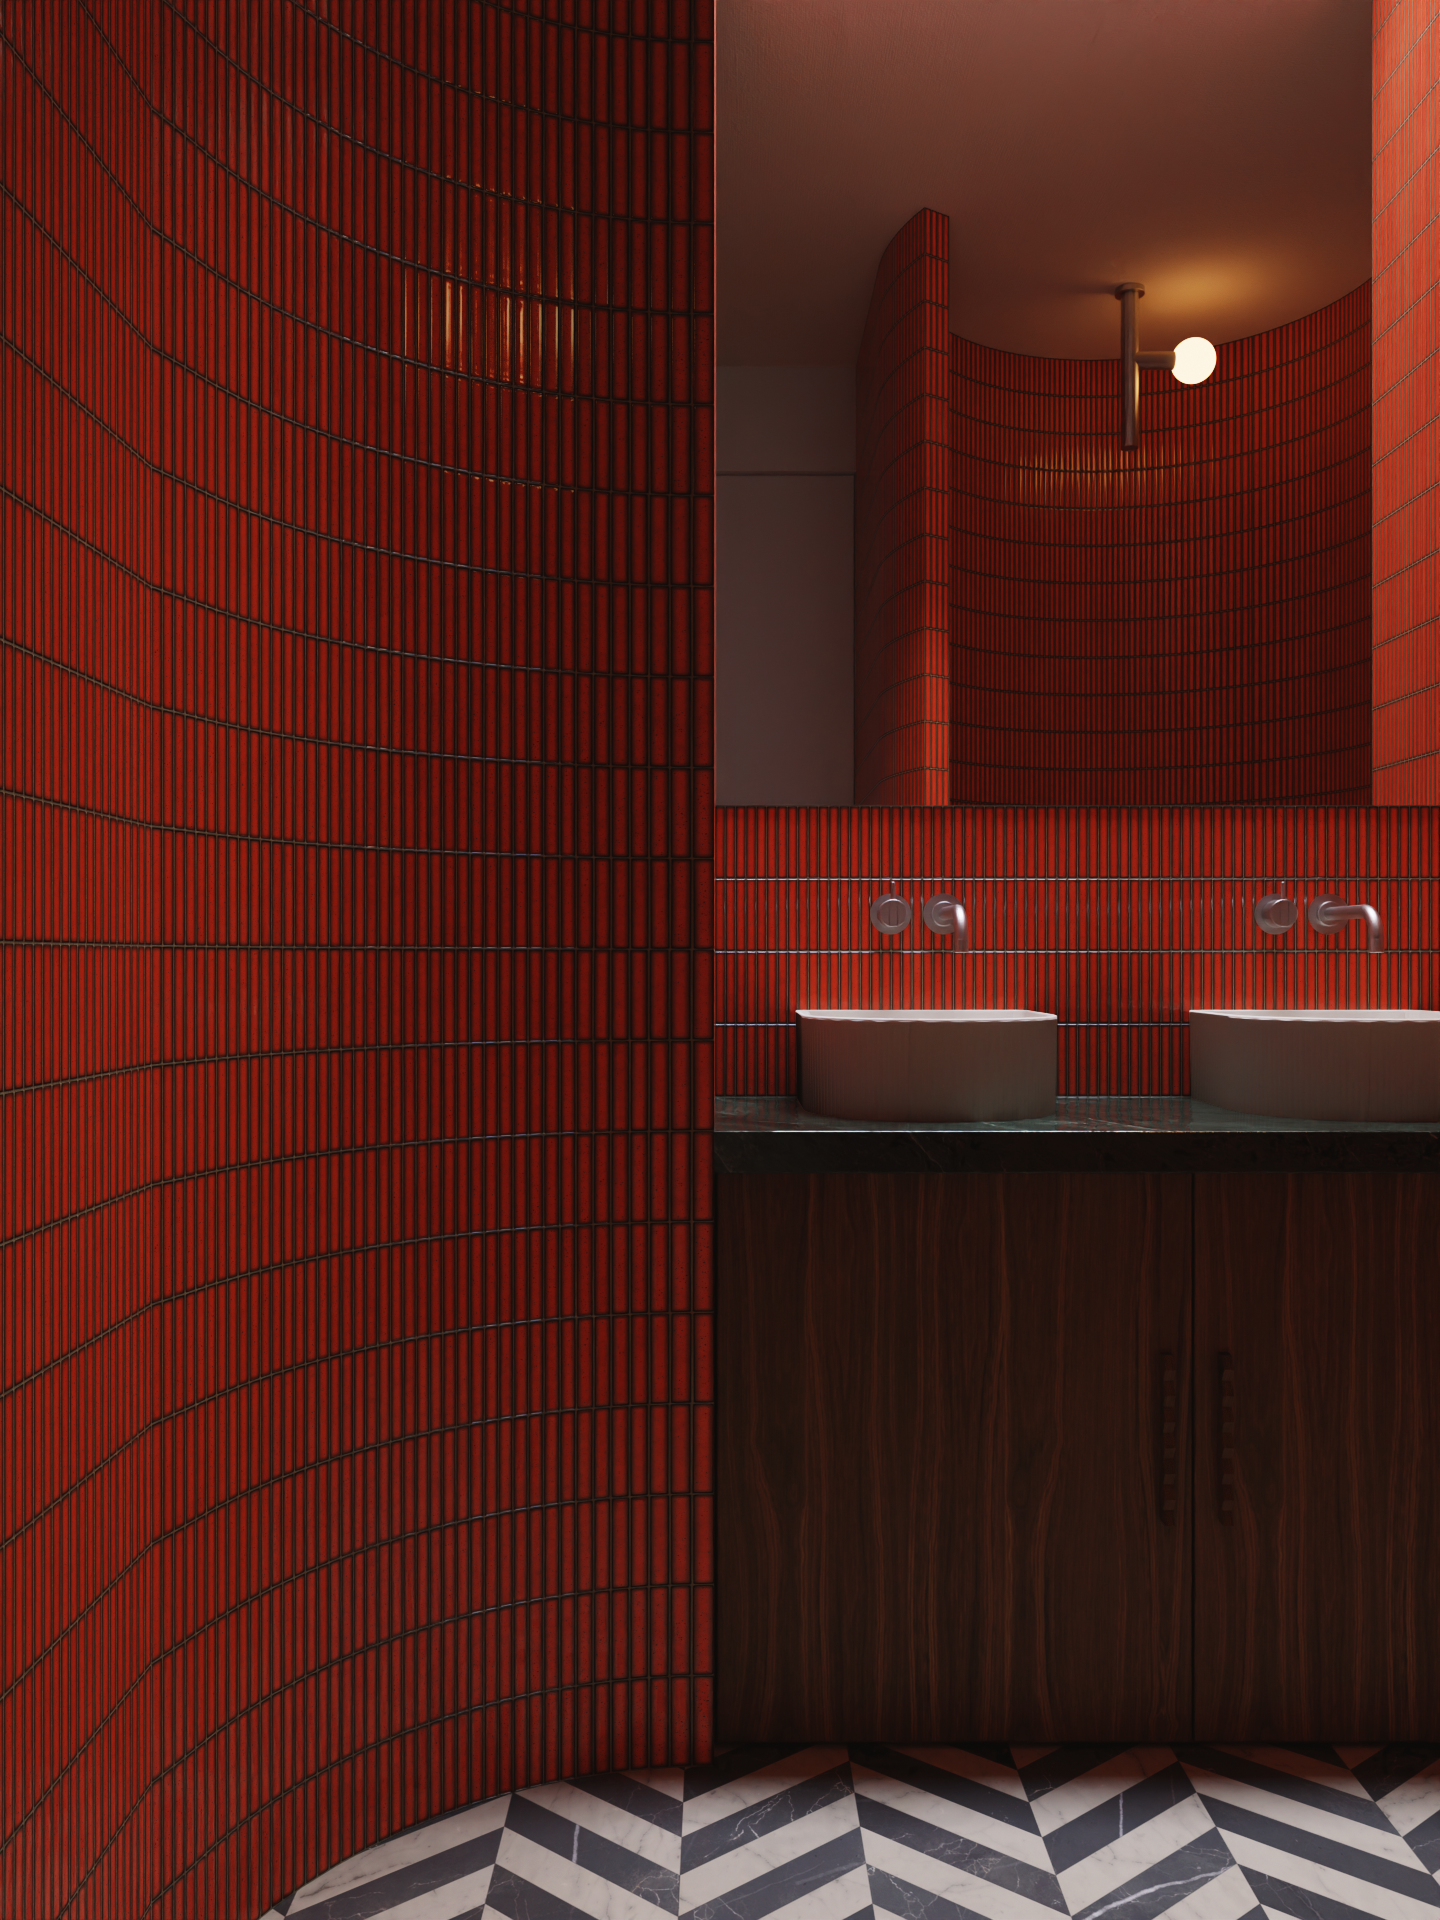 Visual of bathroom with curved walls and red tiles